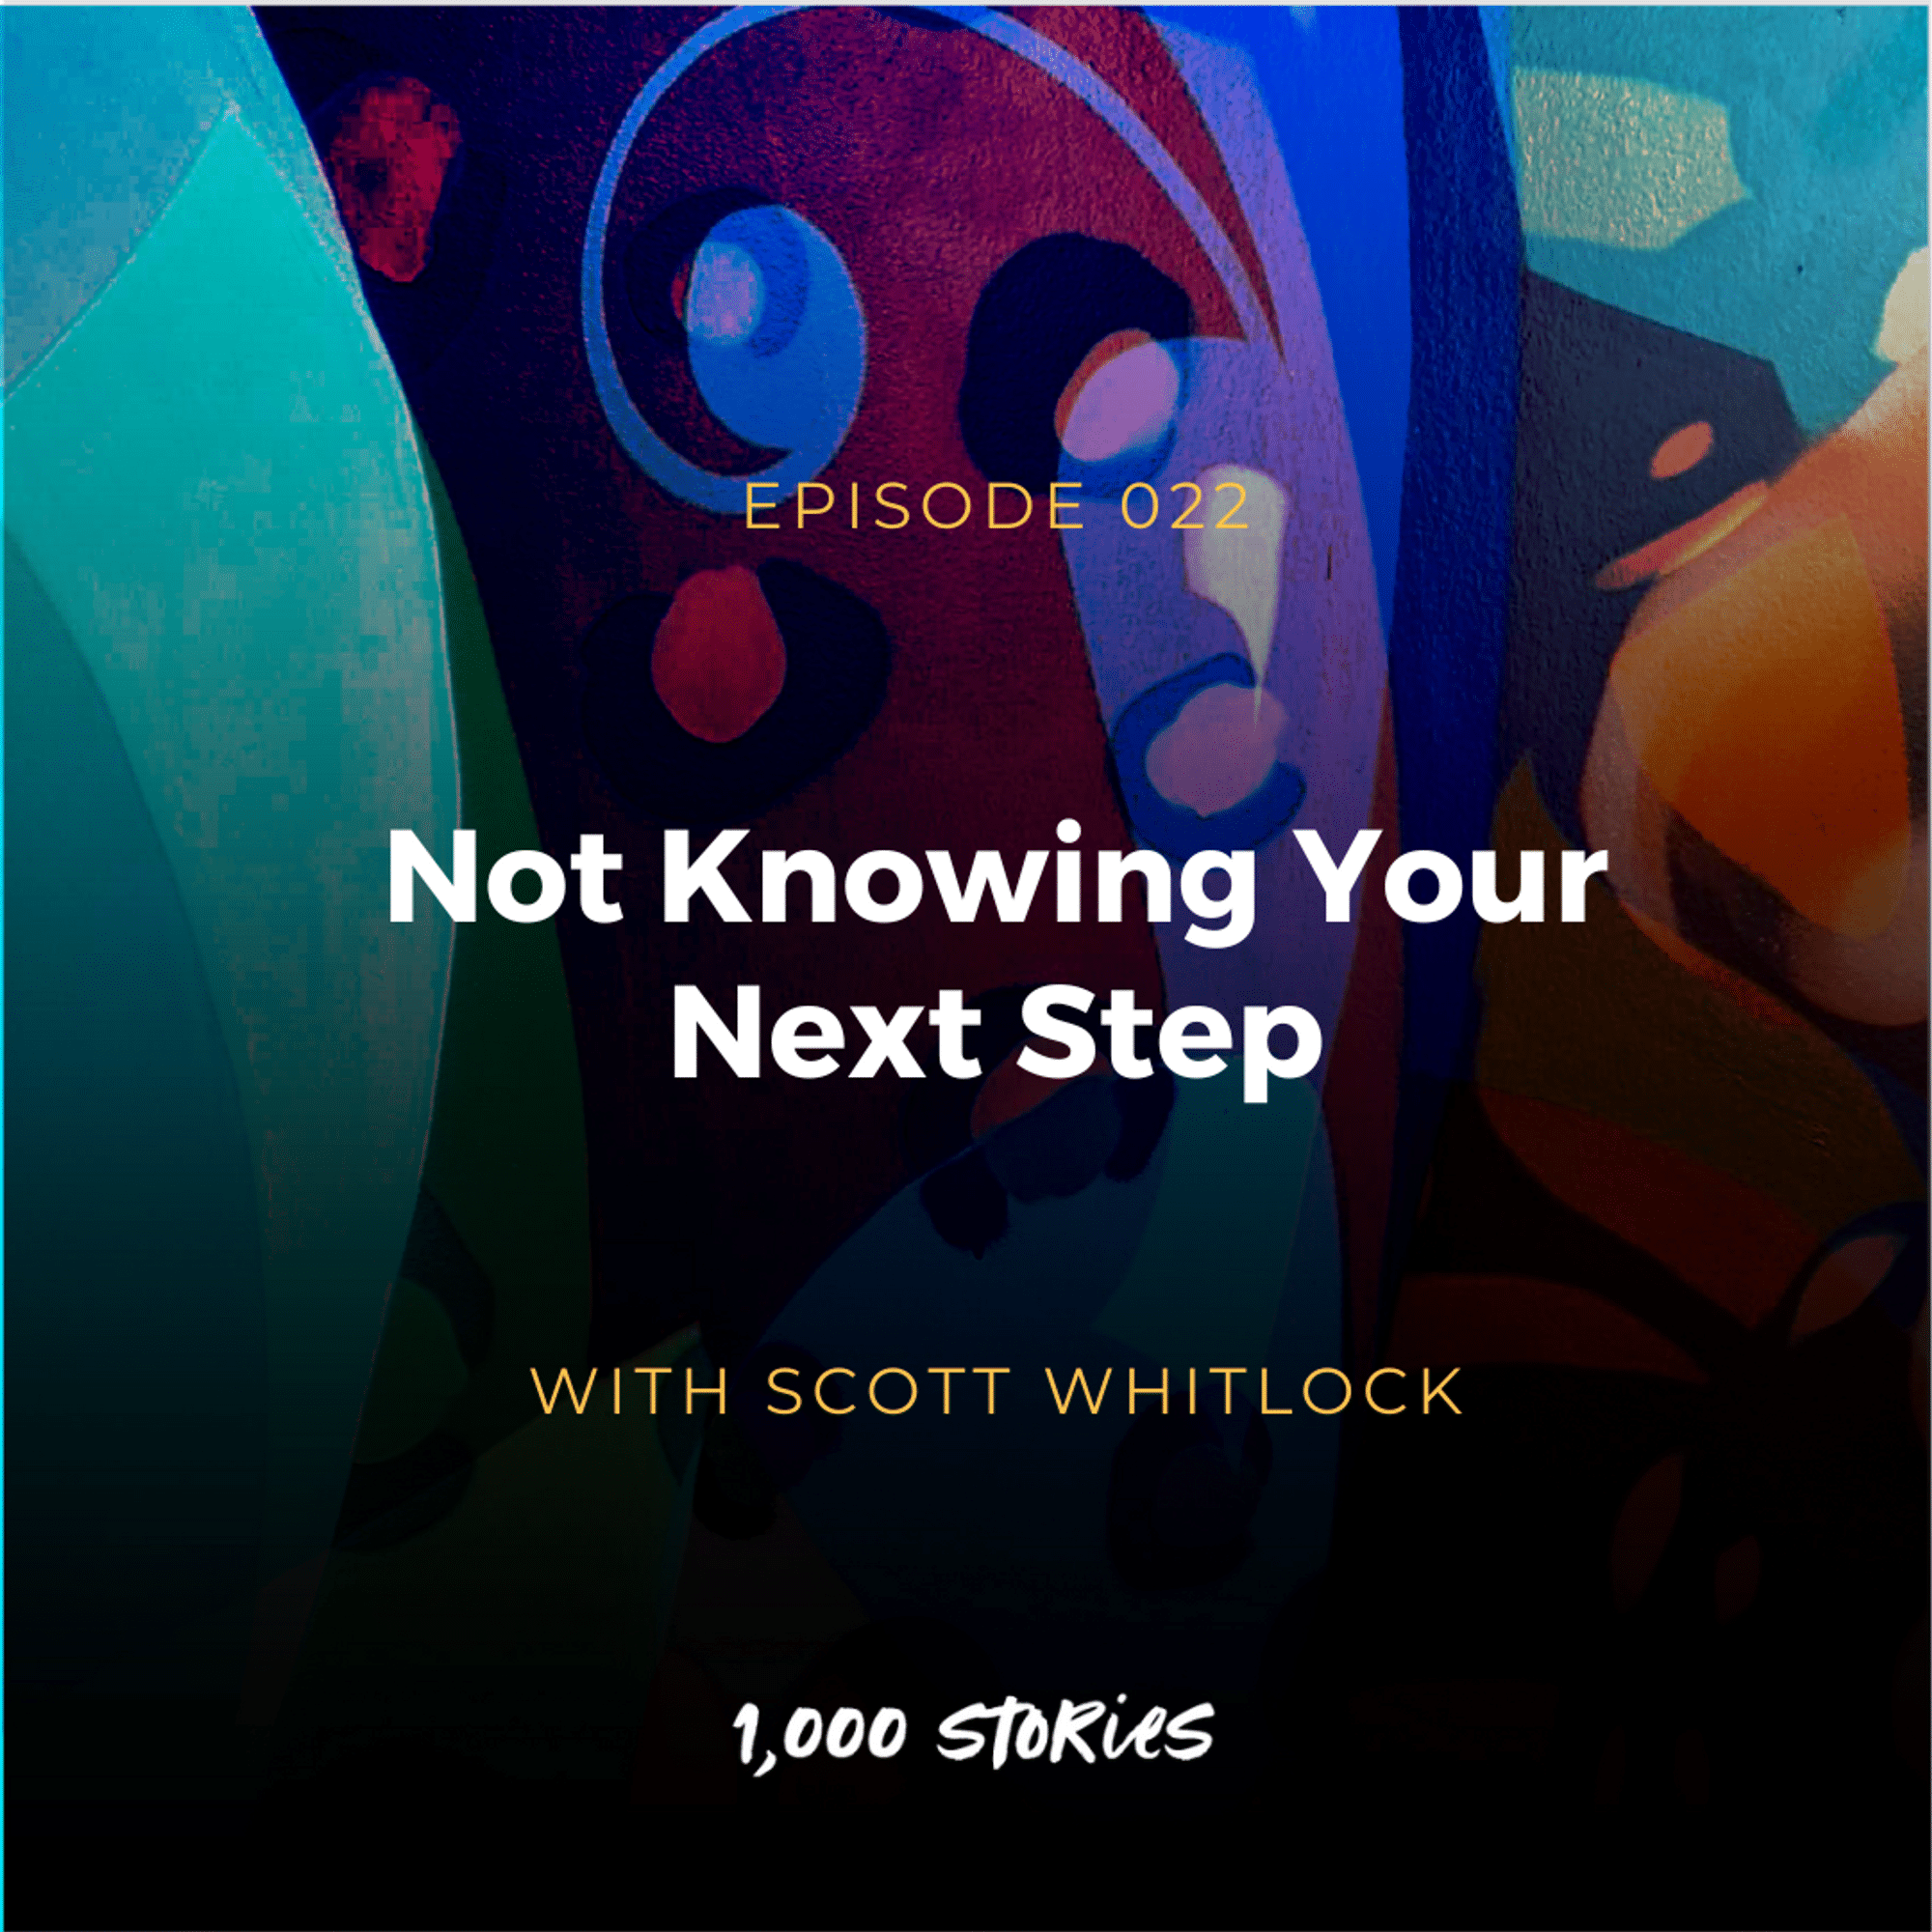 Not Knowing Your Next Step with Scott Whitlock